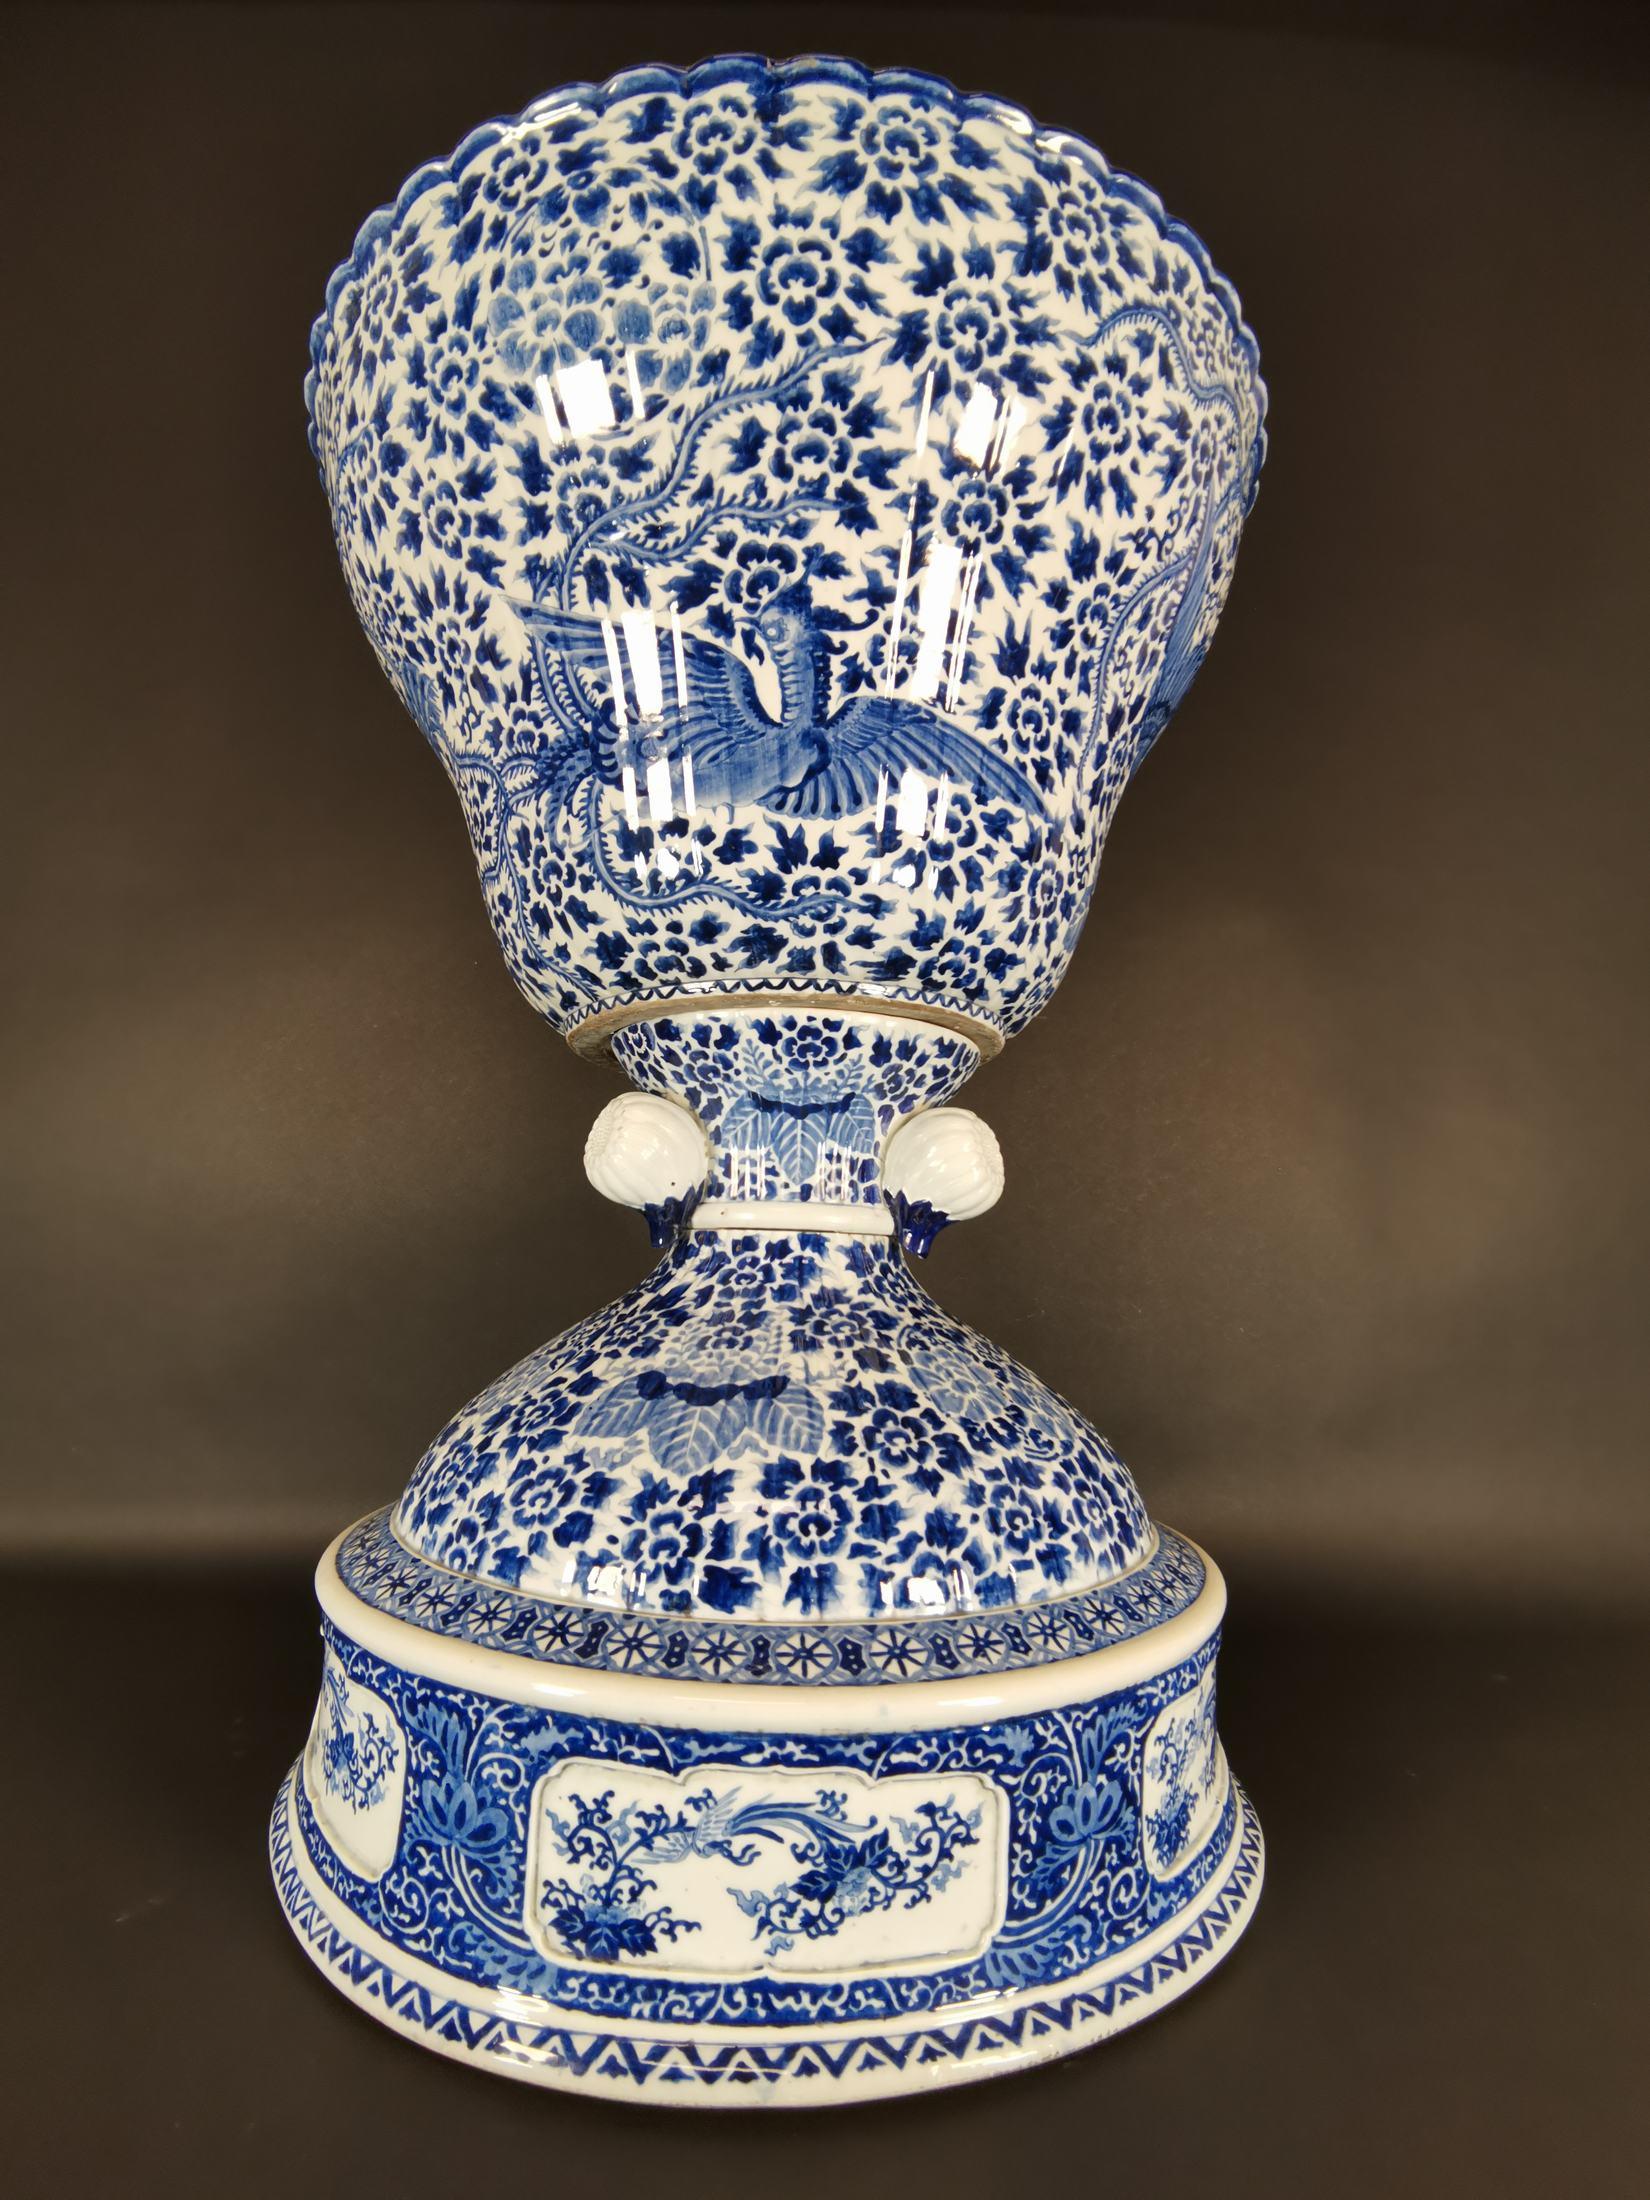 Large 19th century Chinese porcelain vase
It has 3 pieces
Perfect condition
Measures: 83 cm high and 62 cm diameter 3250 Euro.